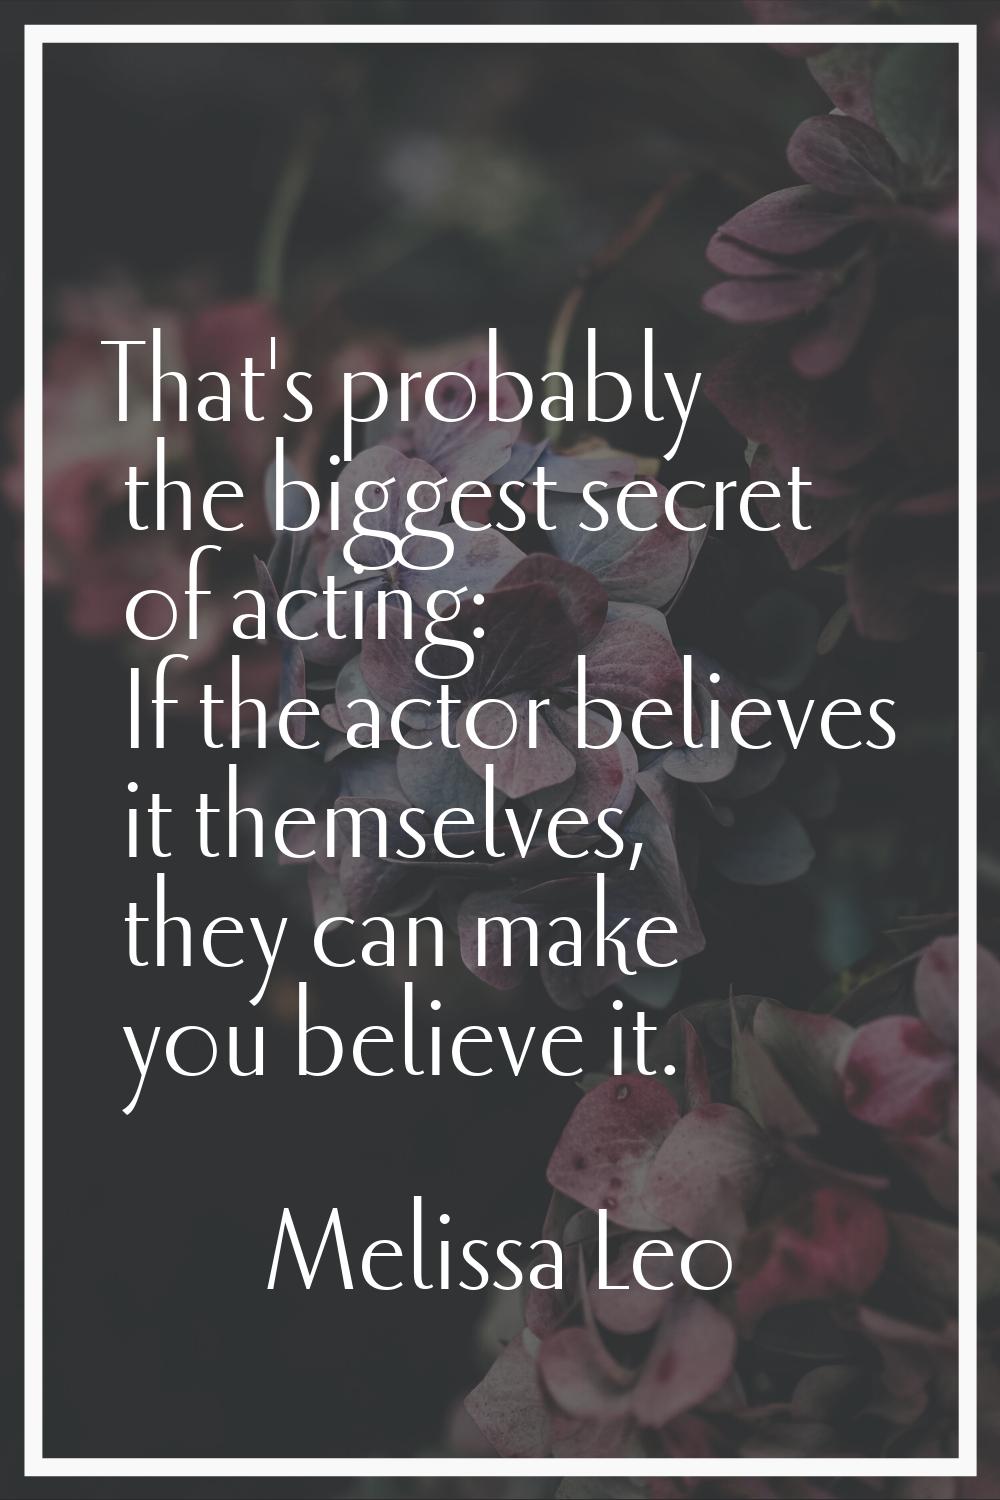 That's probably the biggest secret of acting: If the actor believes it themselves, they can make yo